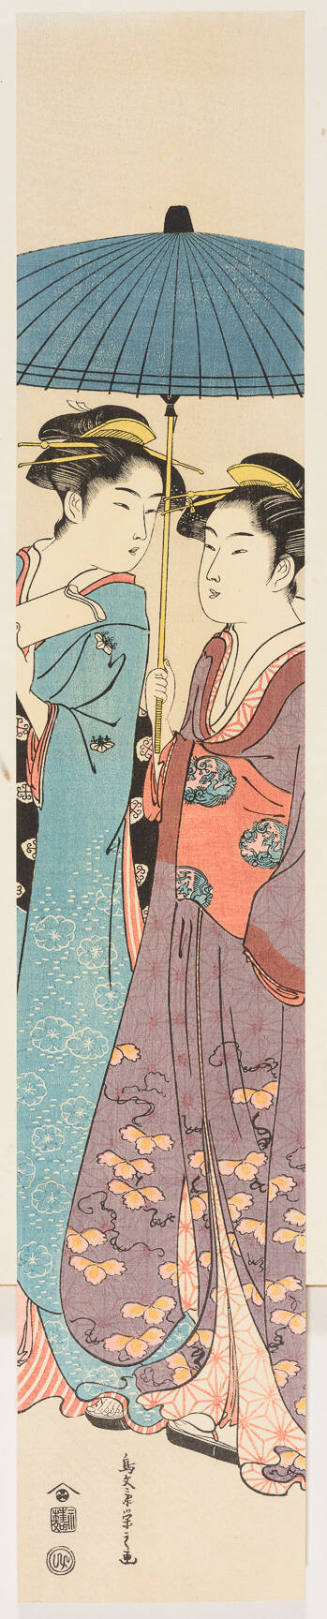 Modern Reproduction of: Two Women Strolling with an Umbrella